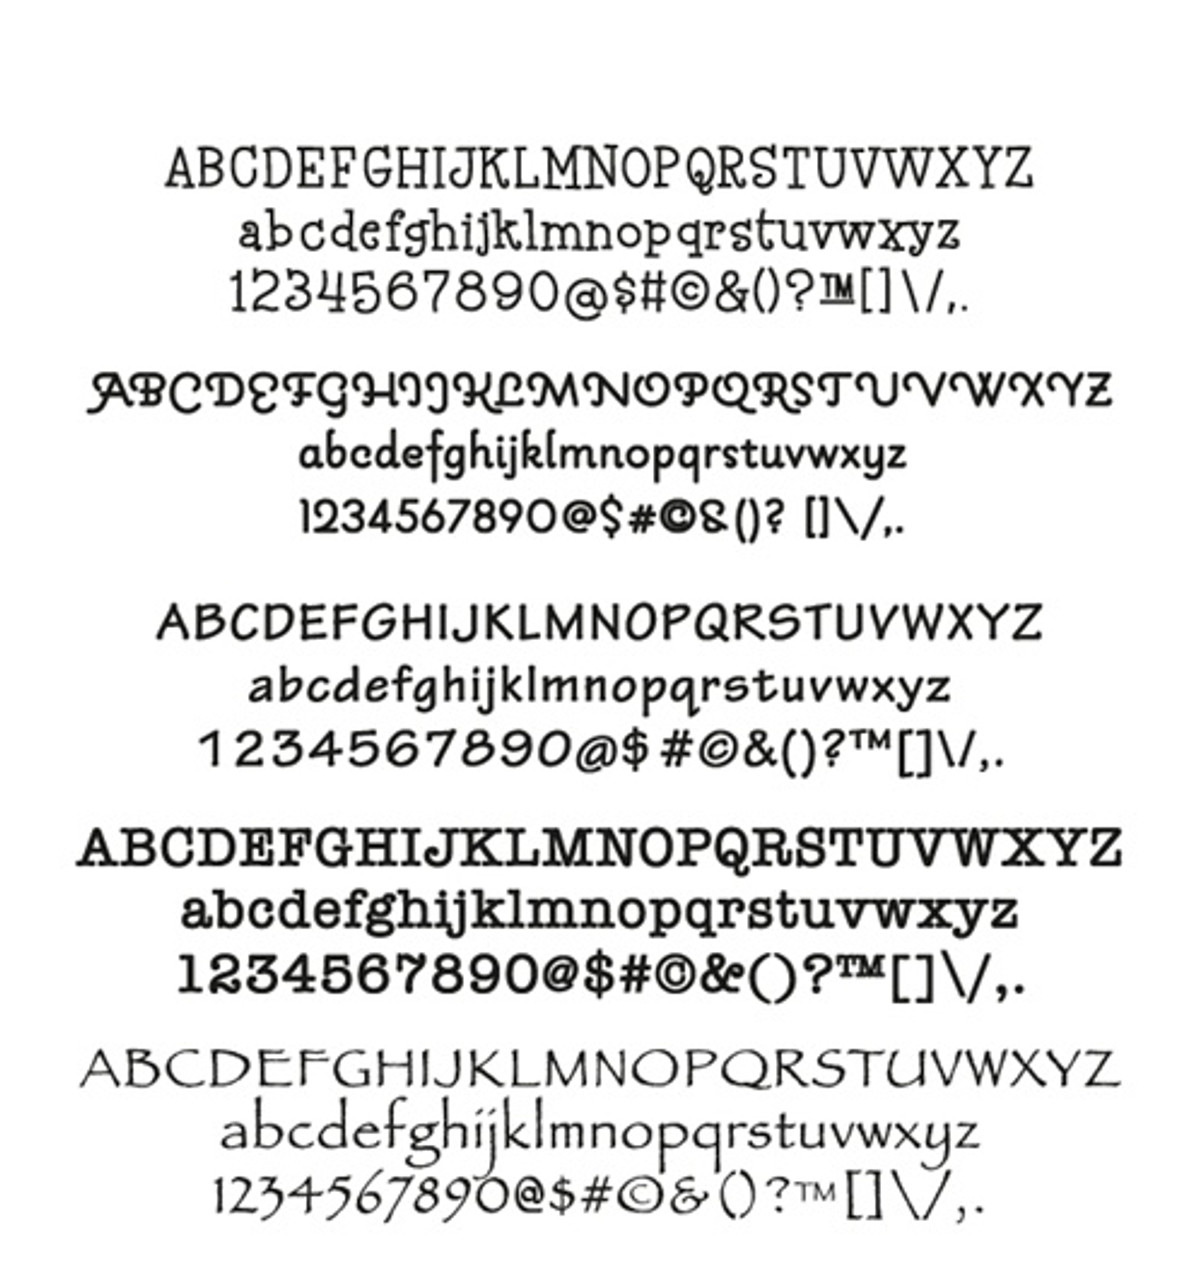 Fonts included in the set